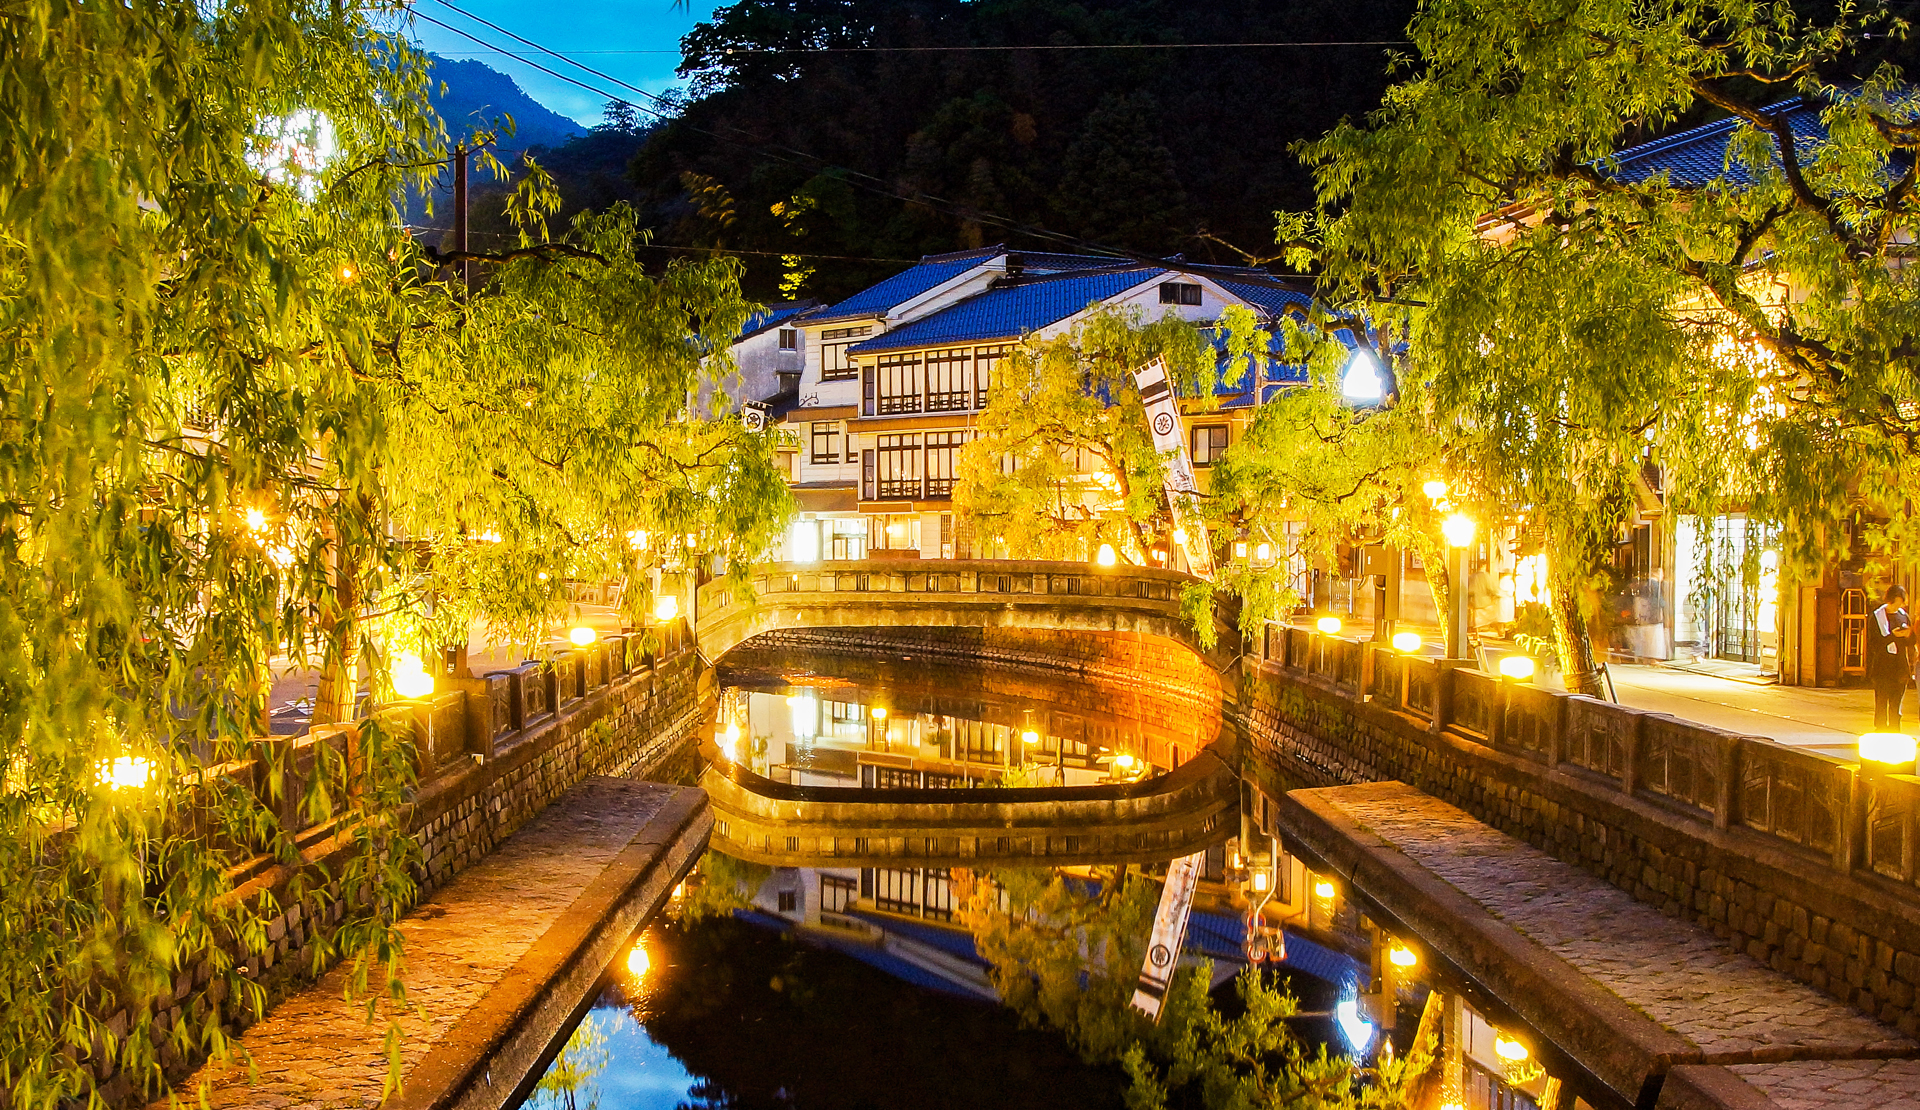 Kinosaki Onsen is a traditional Japanese Onsen culture!